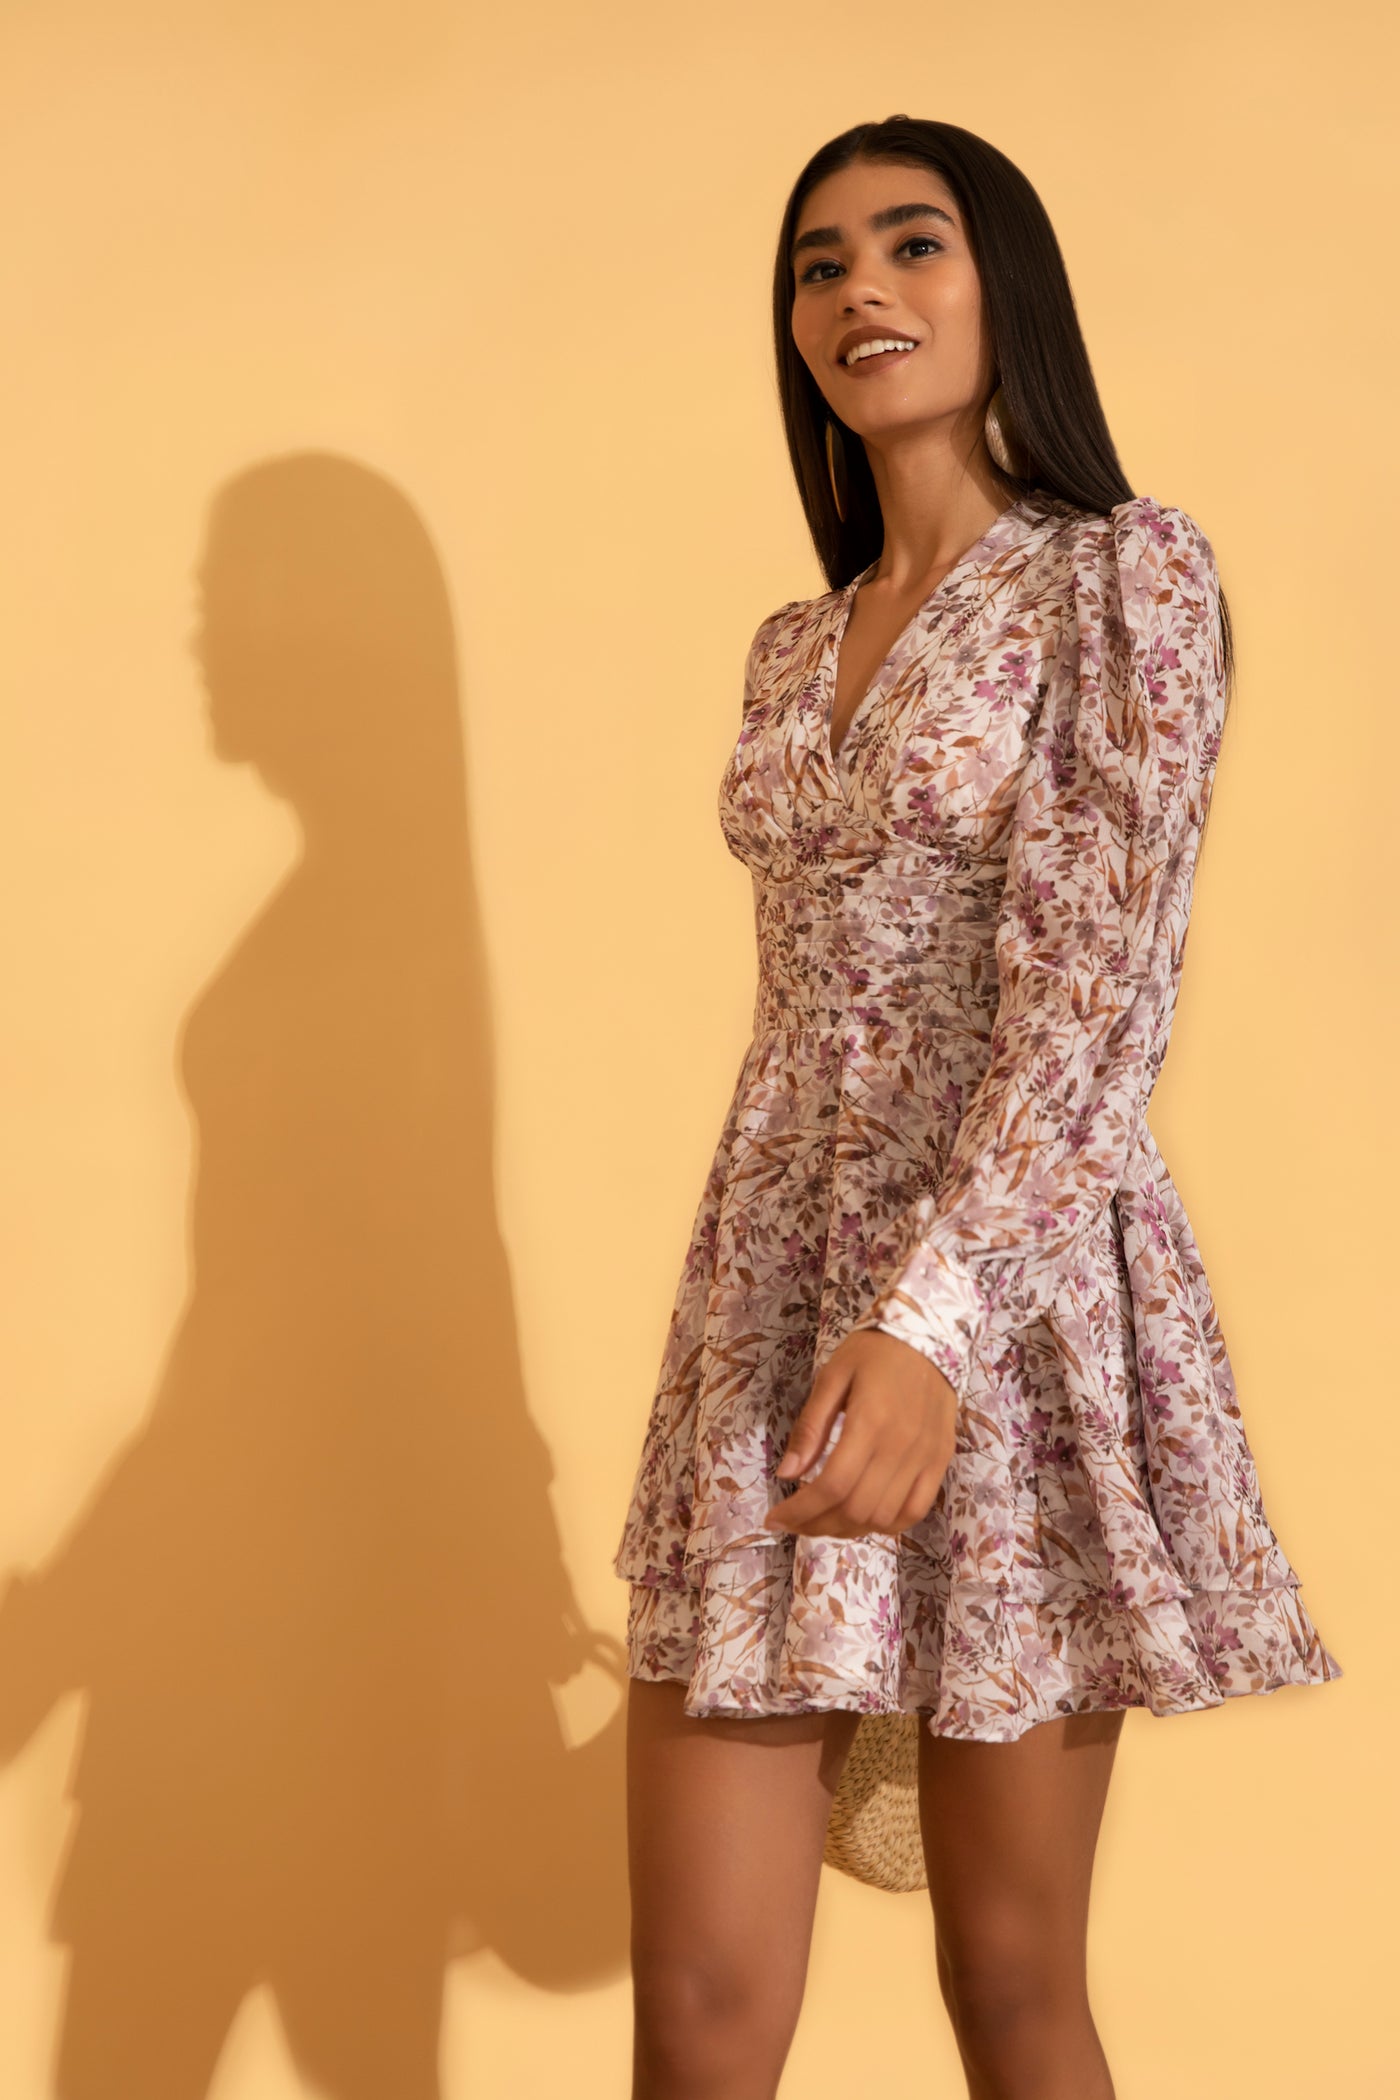 An easygoing casual floral printed ruffle dress in georgette made by Torqadorn